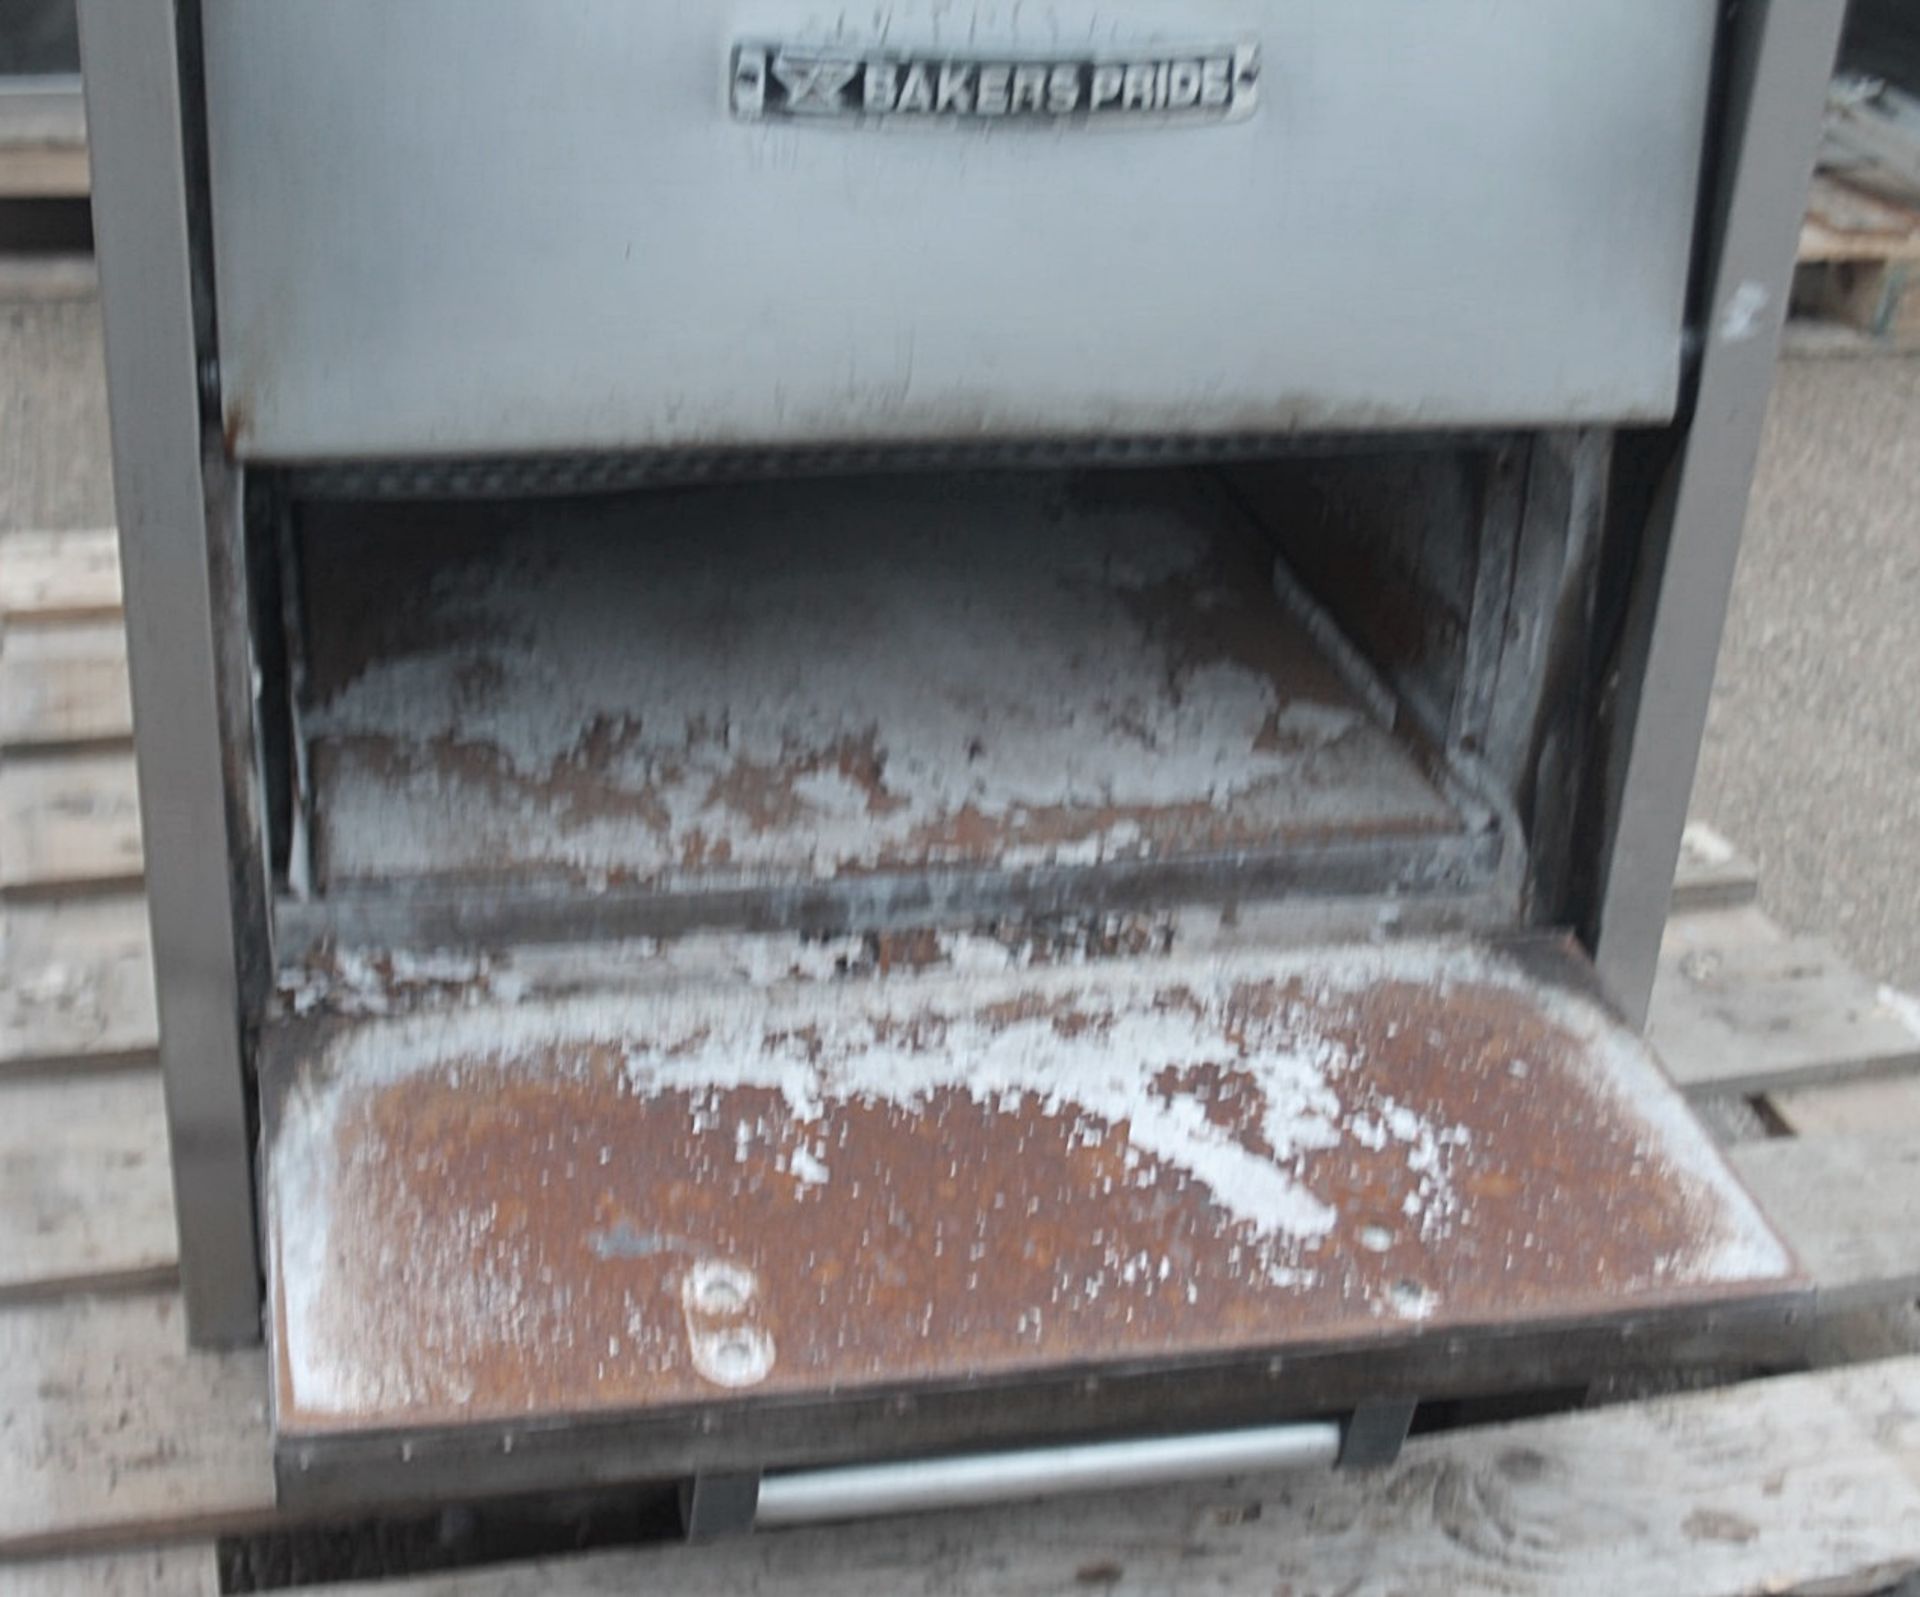 1 x Bakers Pride Three Deck Commercial Electric Pizza Oven - CL805 - Location: Altrincham - Image 4 of 7